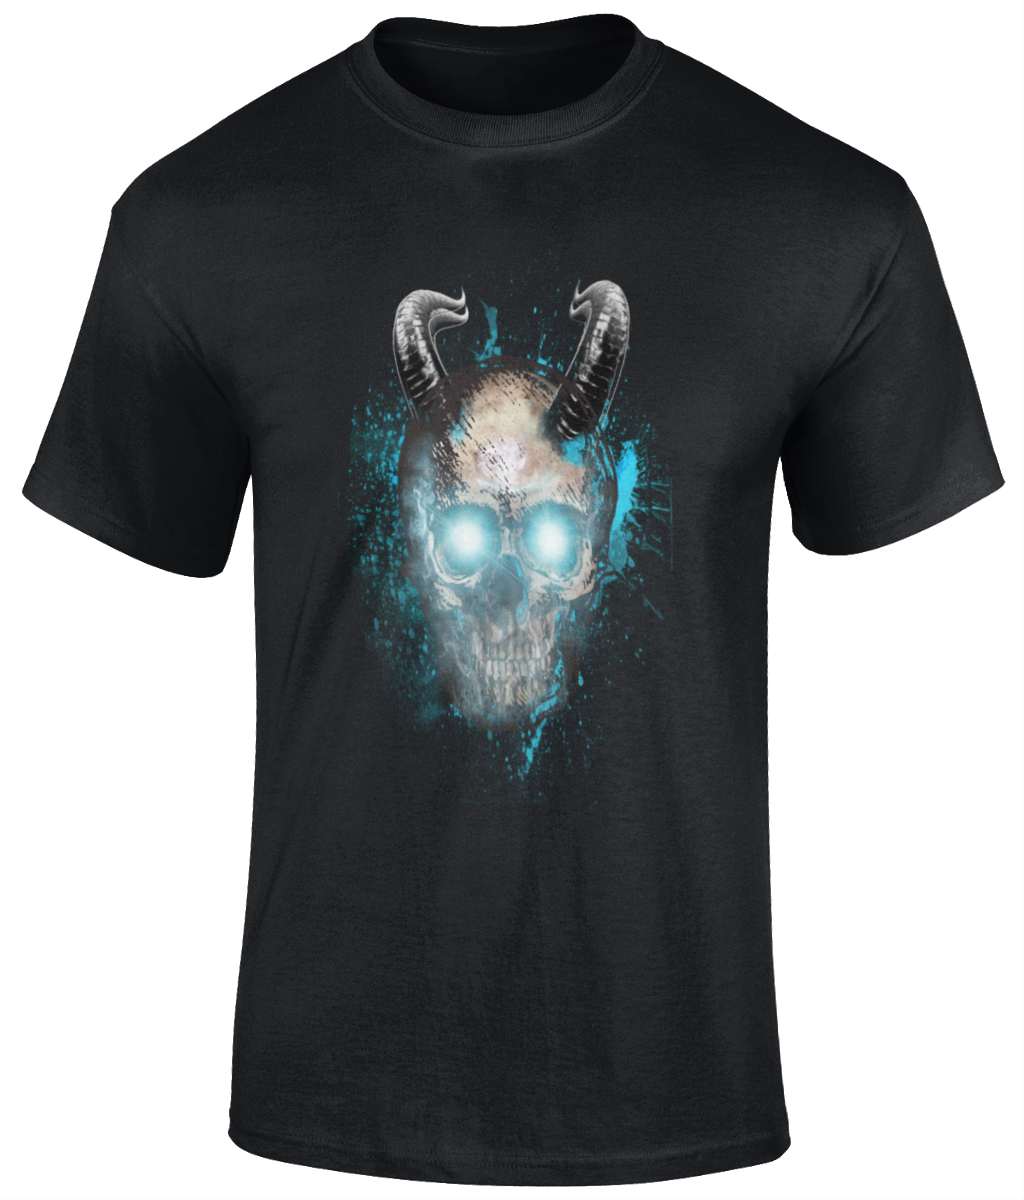 "BLUE EYES" Original artwork on black unisex t shirt  Material: 100% cotton.  Seamless twin needle collar. Taped neck and shoulders. Tubular body. Twin needle sleeves and hem.  Sizes: small, medium, large, XL, 2XL, 3XL 4XL 5XL